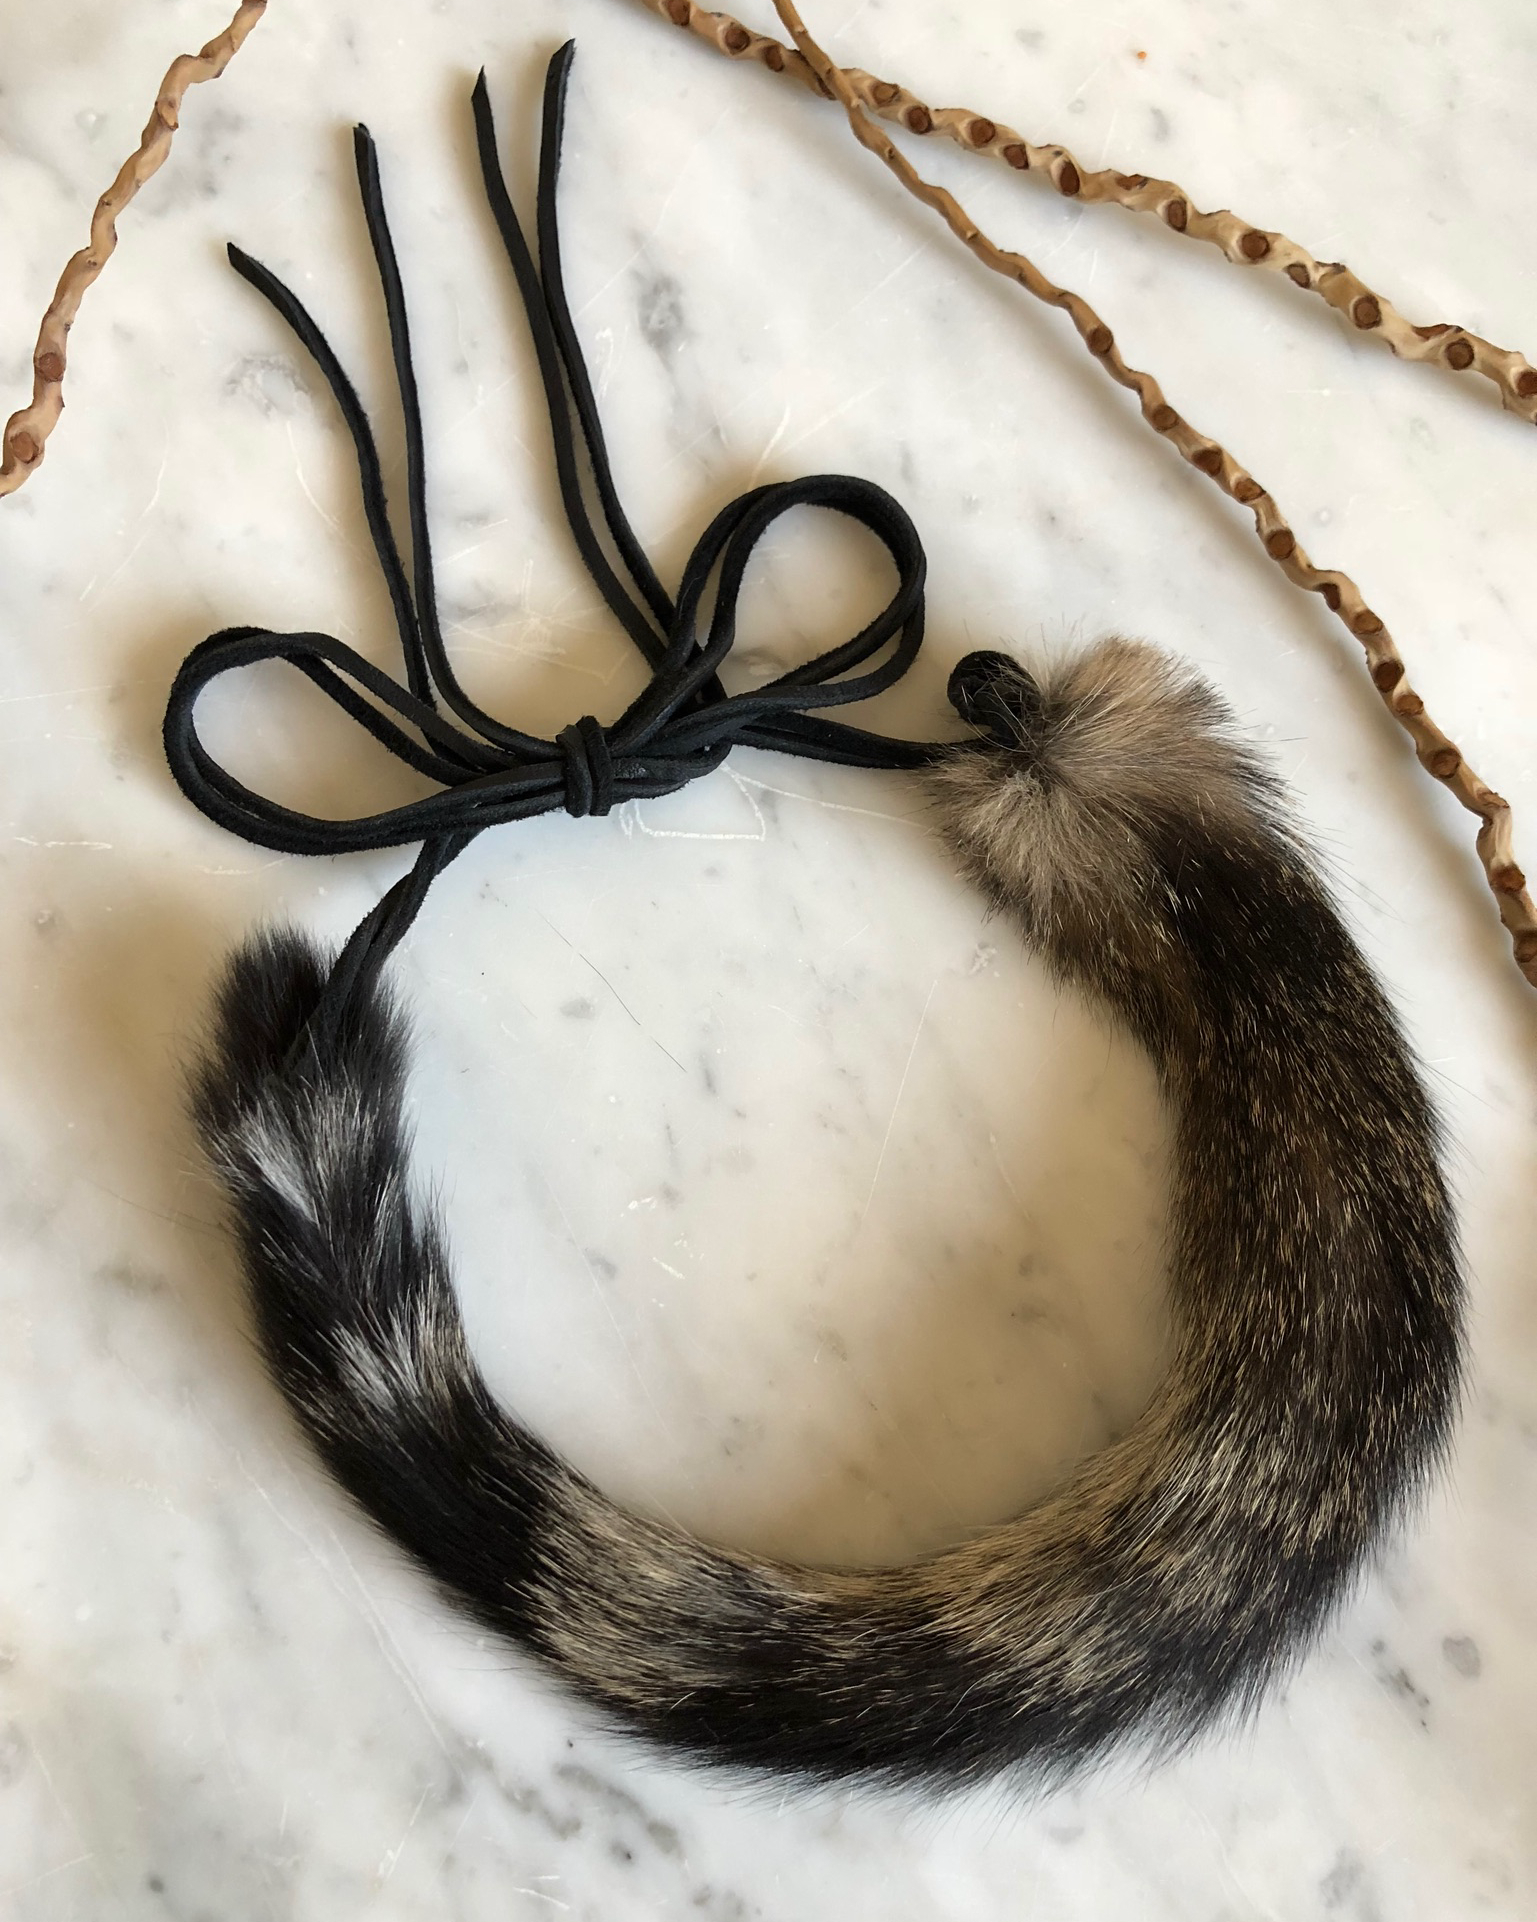 Cat's tail fashioned into a necklace and tied with leather cord